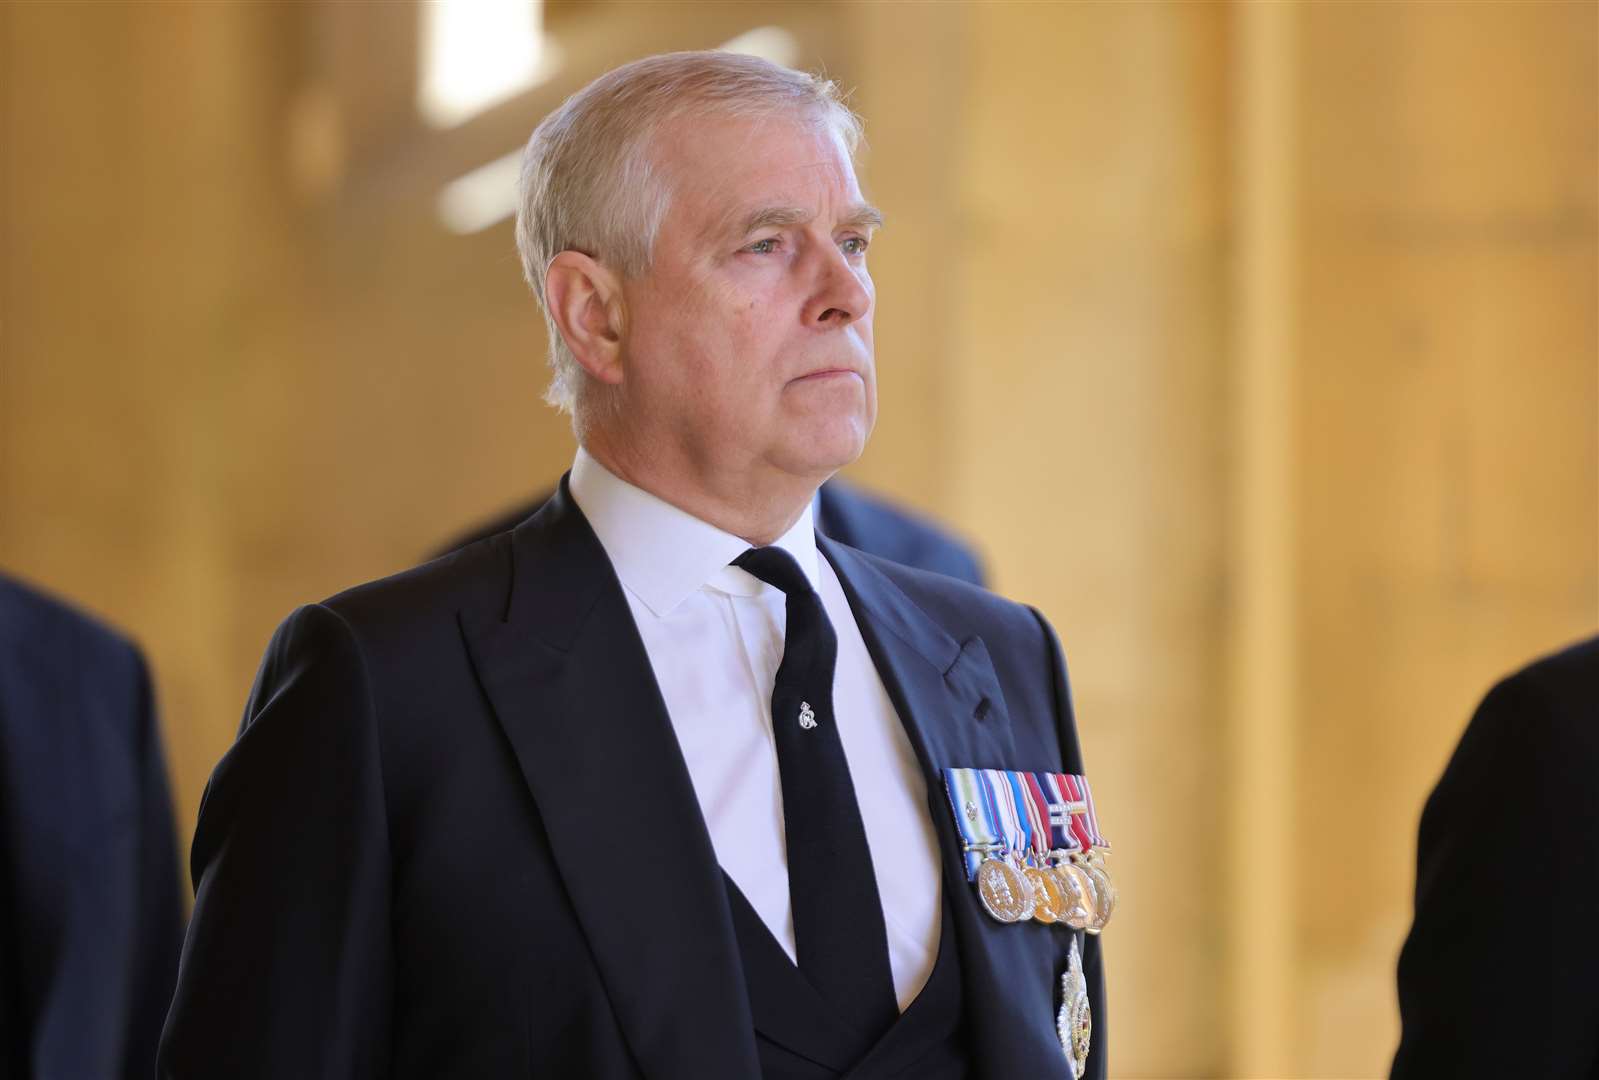 The Duke of York ahead of his father’s funeral (Chris Jackson/PA)